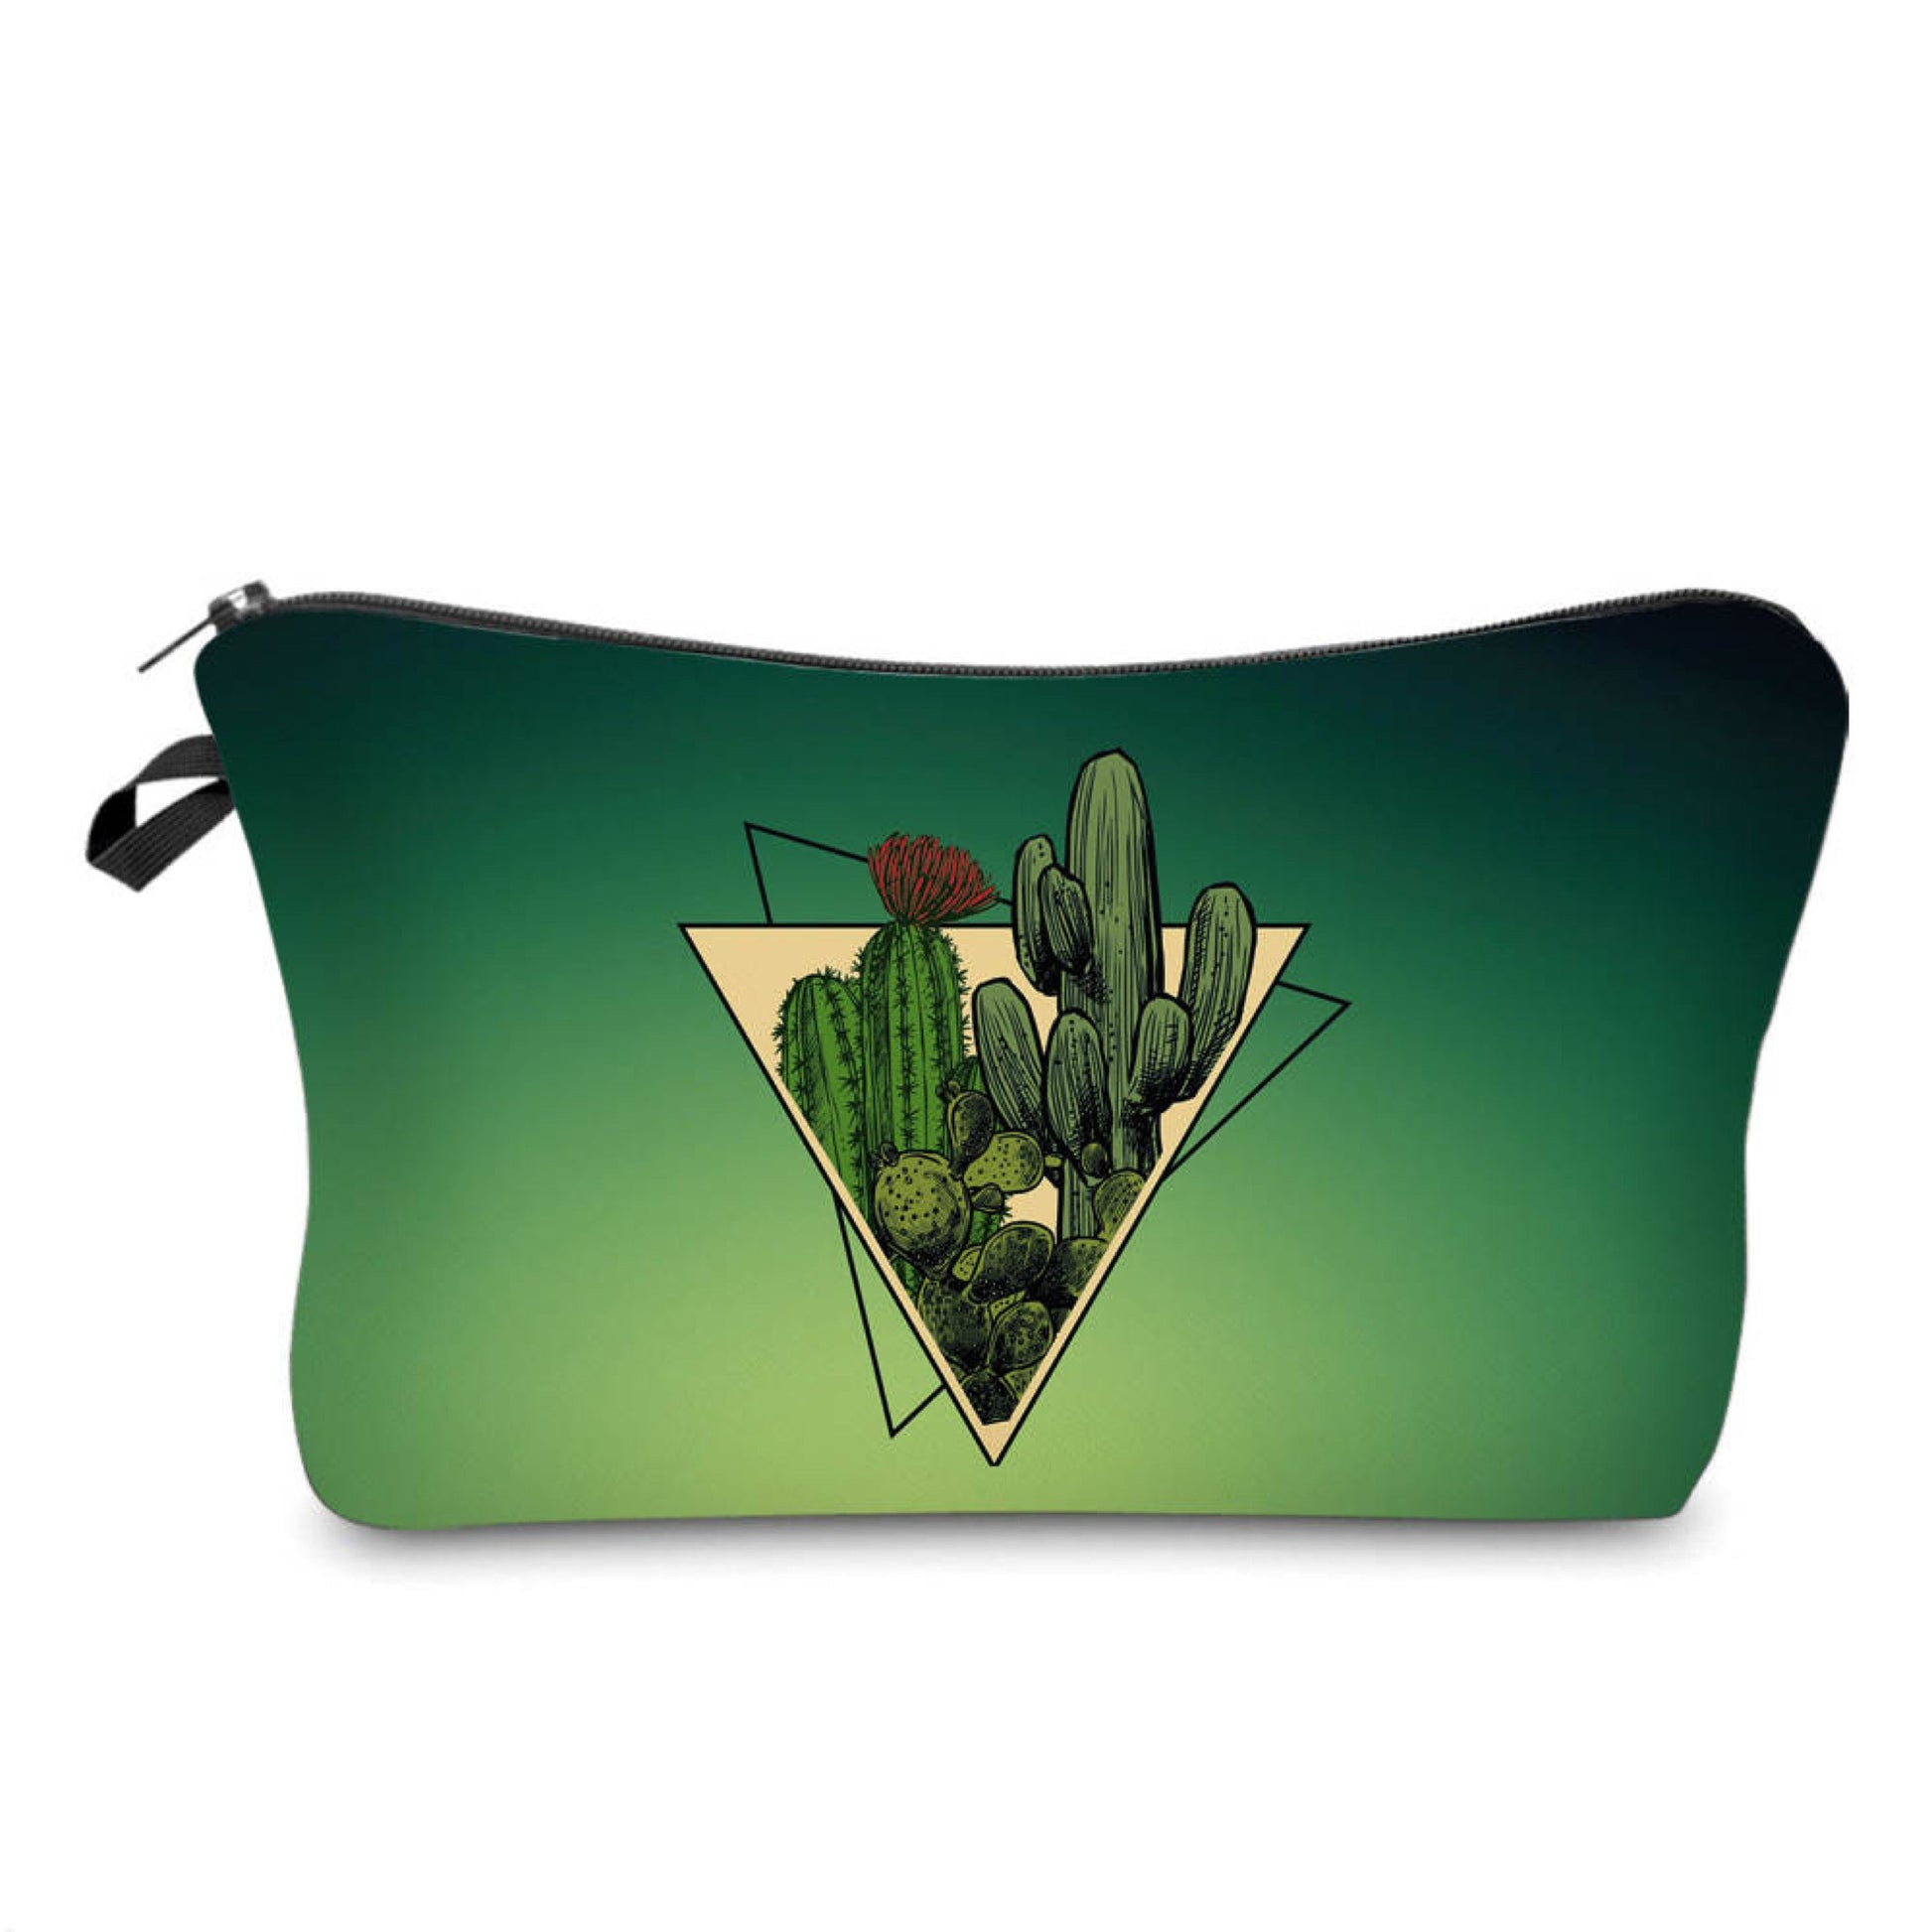 Pouch - Cactus Triangle